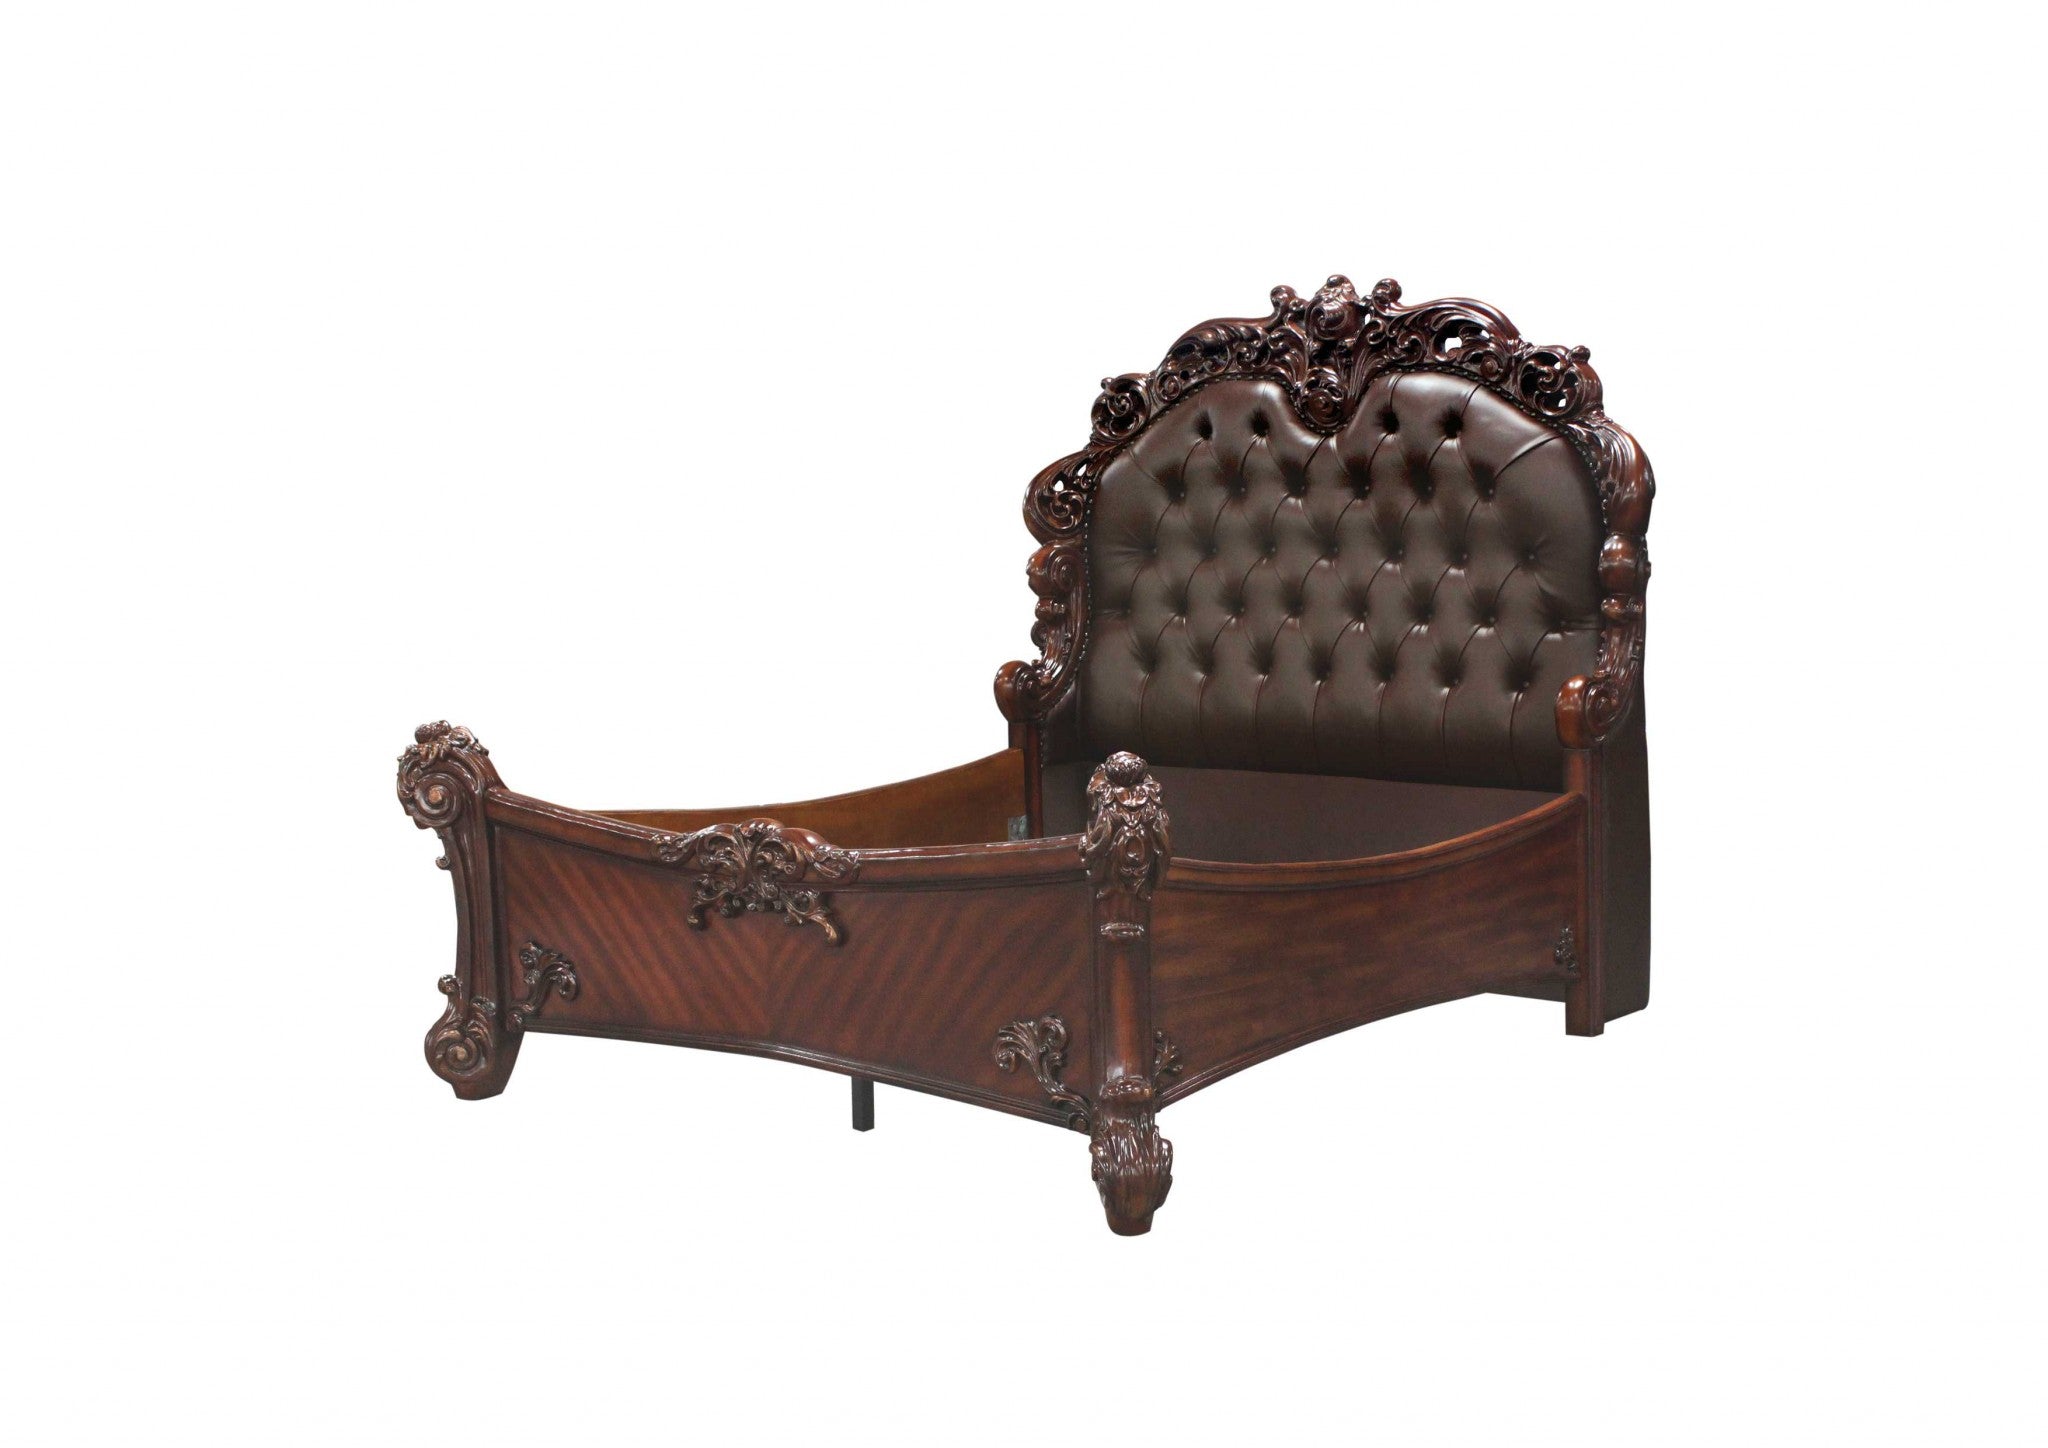 California King Size Elaborately Carved Cherry Wood Finish Bed with Tufted Dark Faux Leather Headboard Default Title